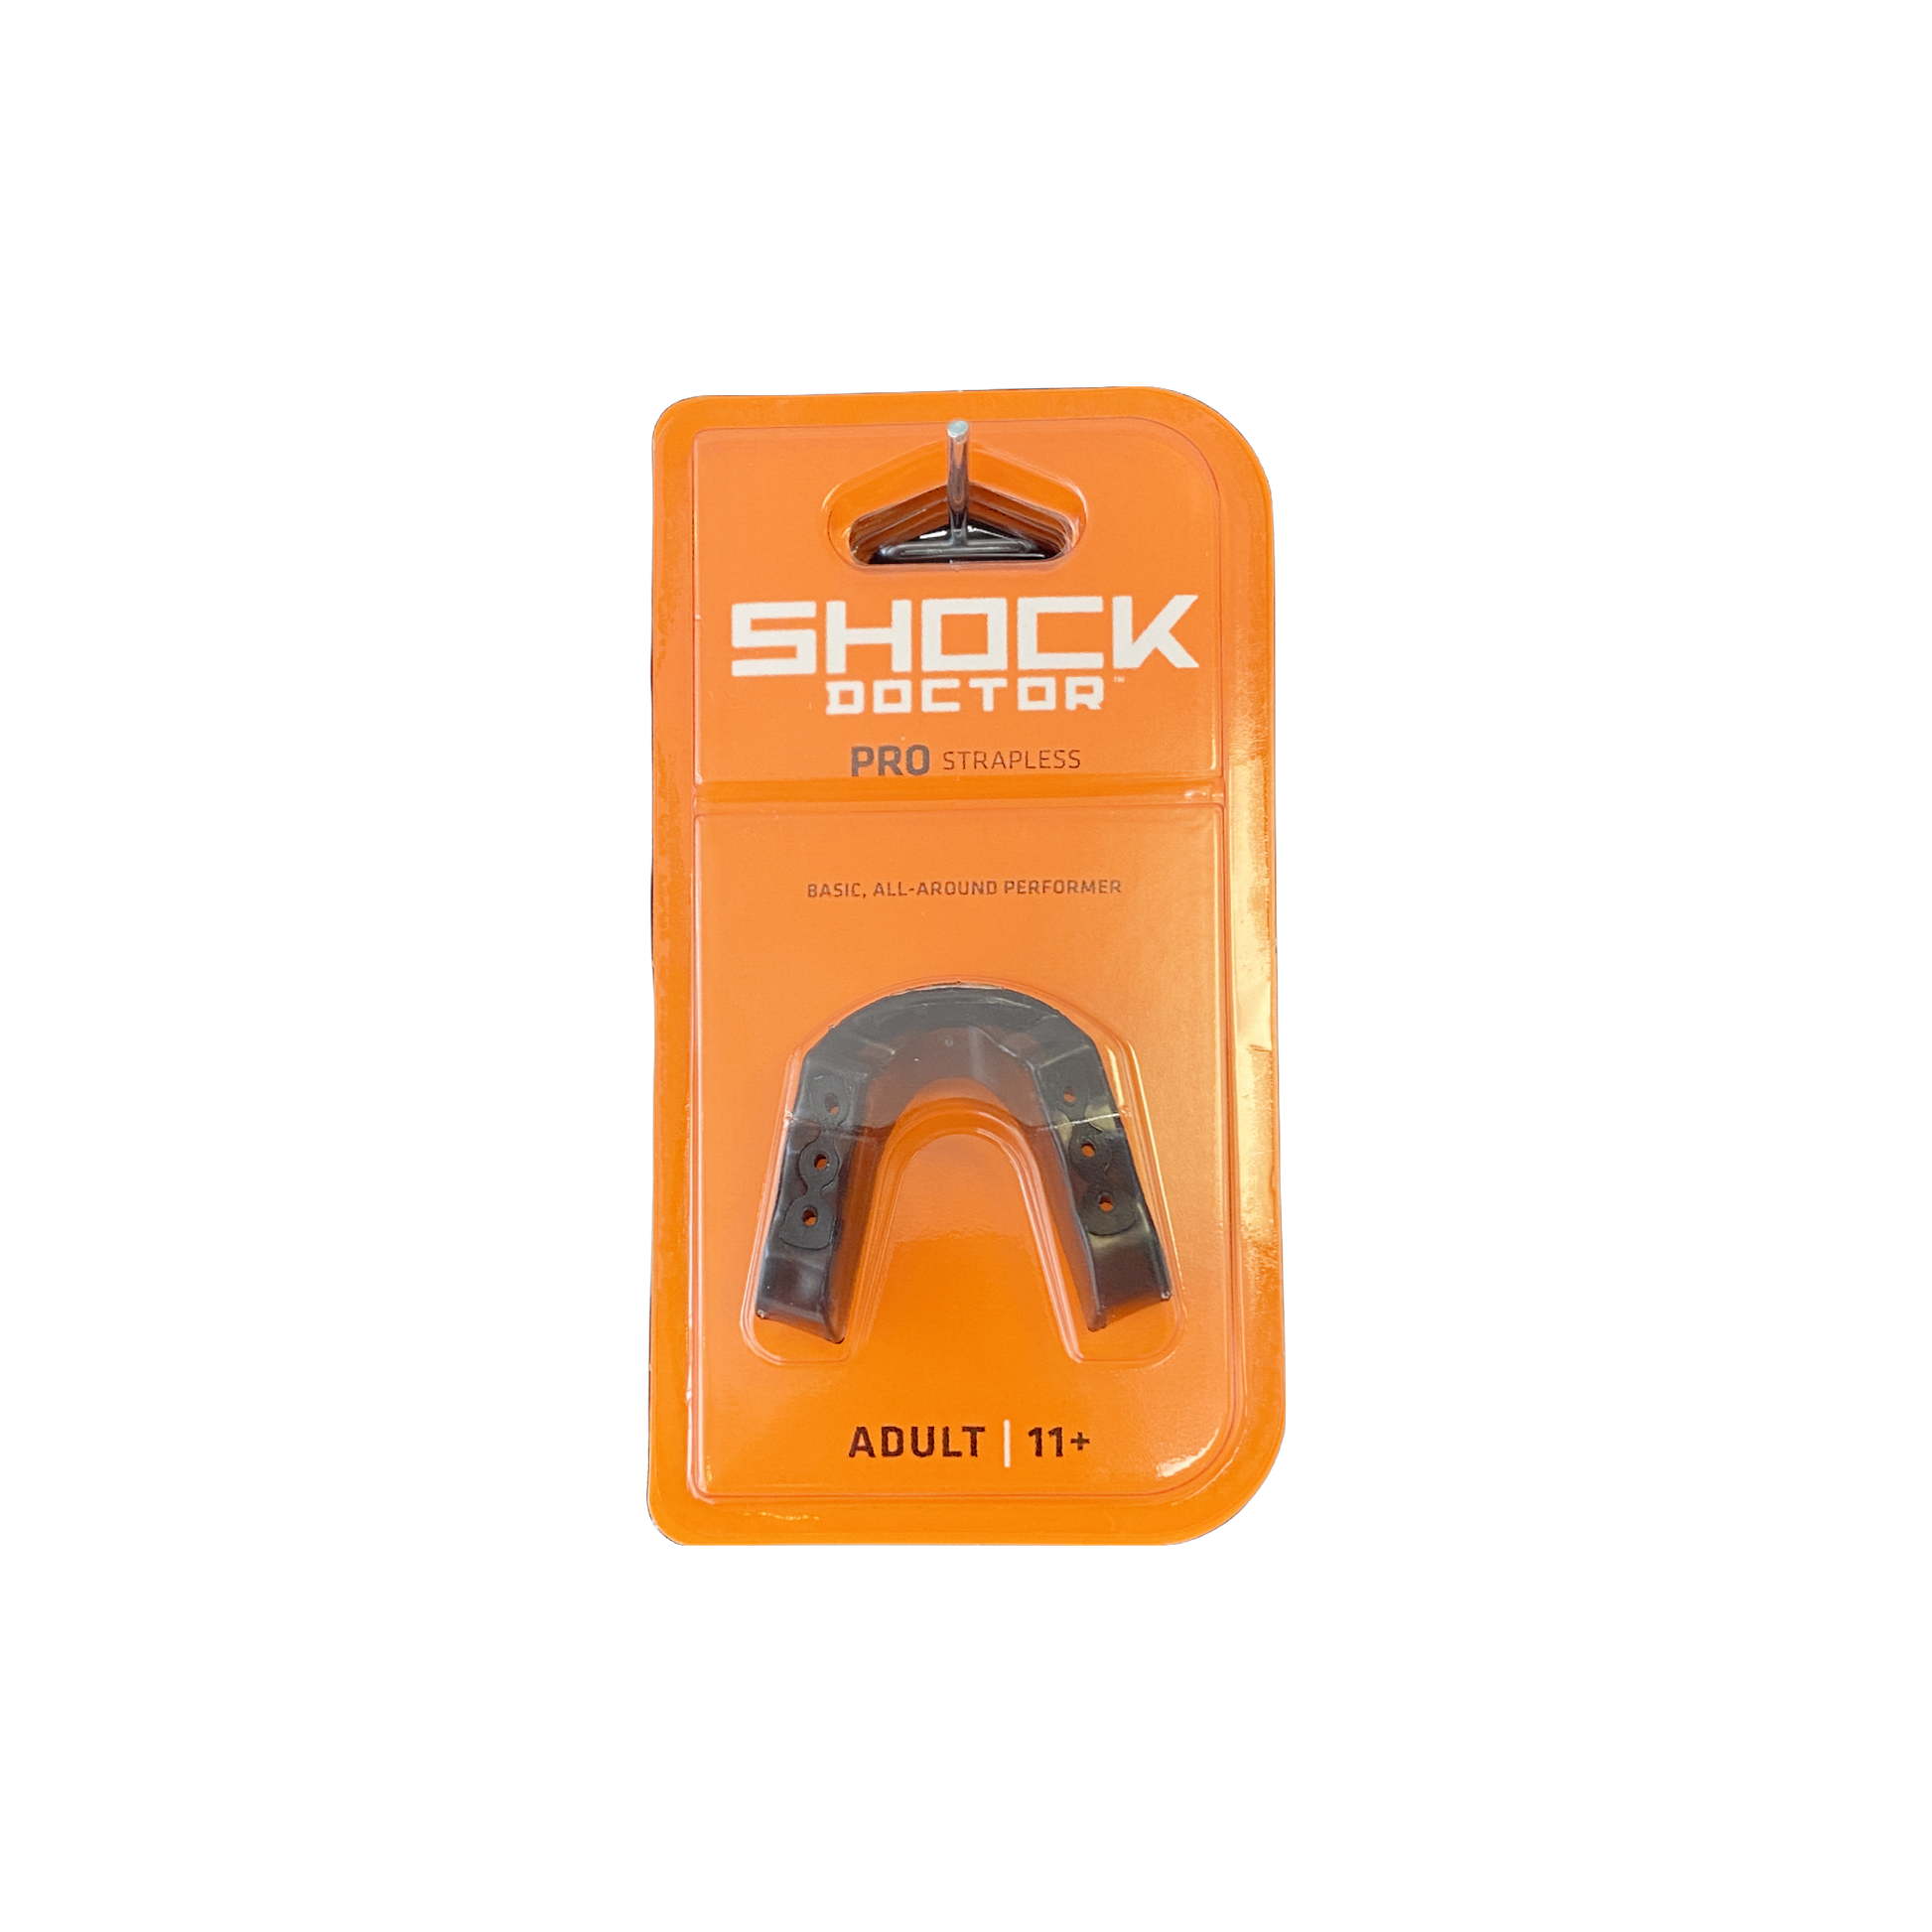 Shock Doctor Pro Mouth Guard, Adult